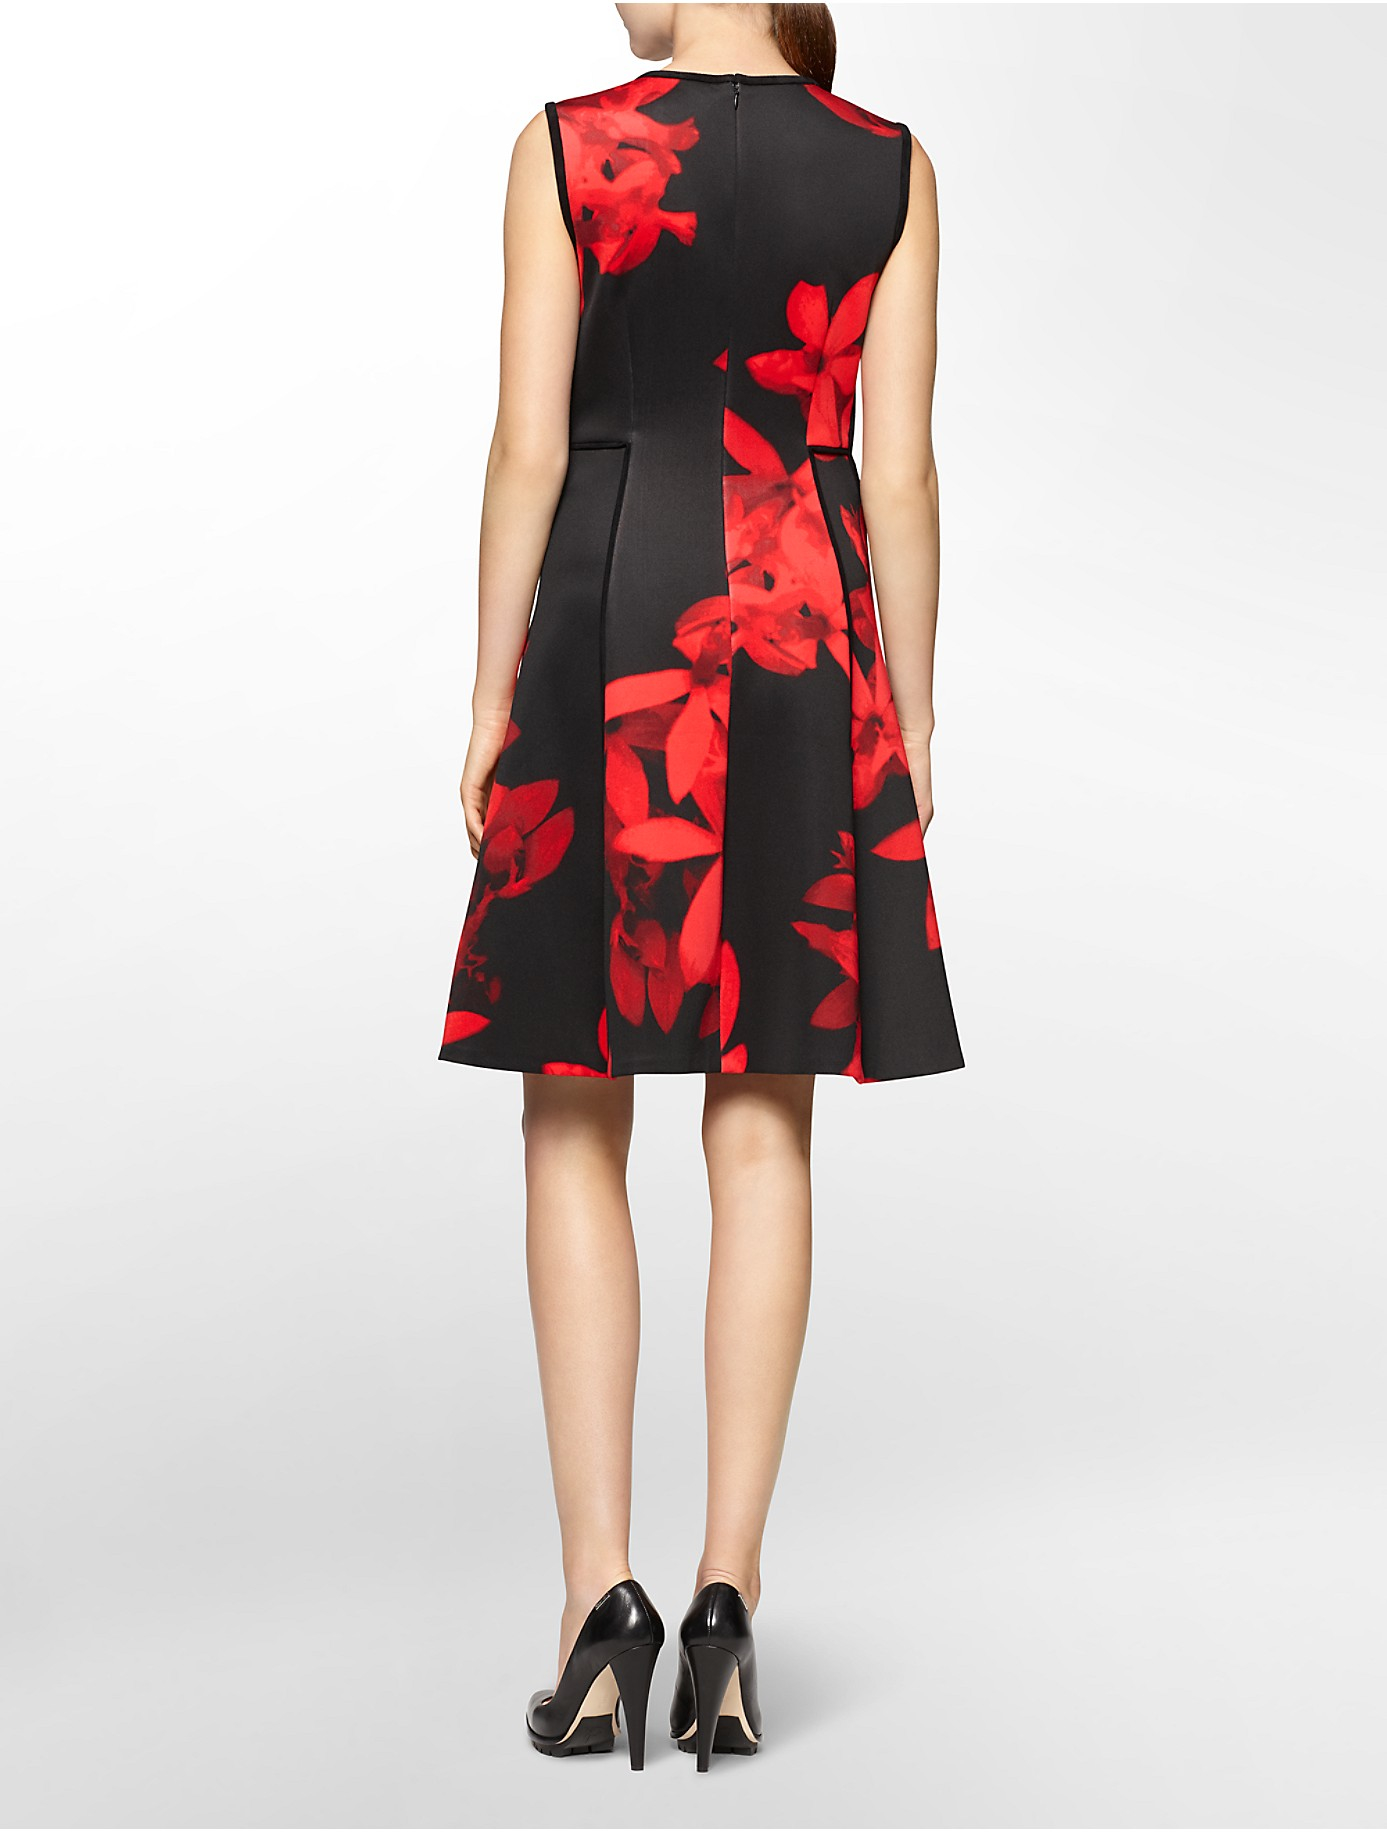 Calvin Klein White Label Exploded Floral Print Sleeveless Fit + Flare Dress  in Black | Lyst